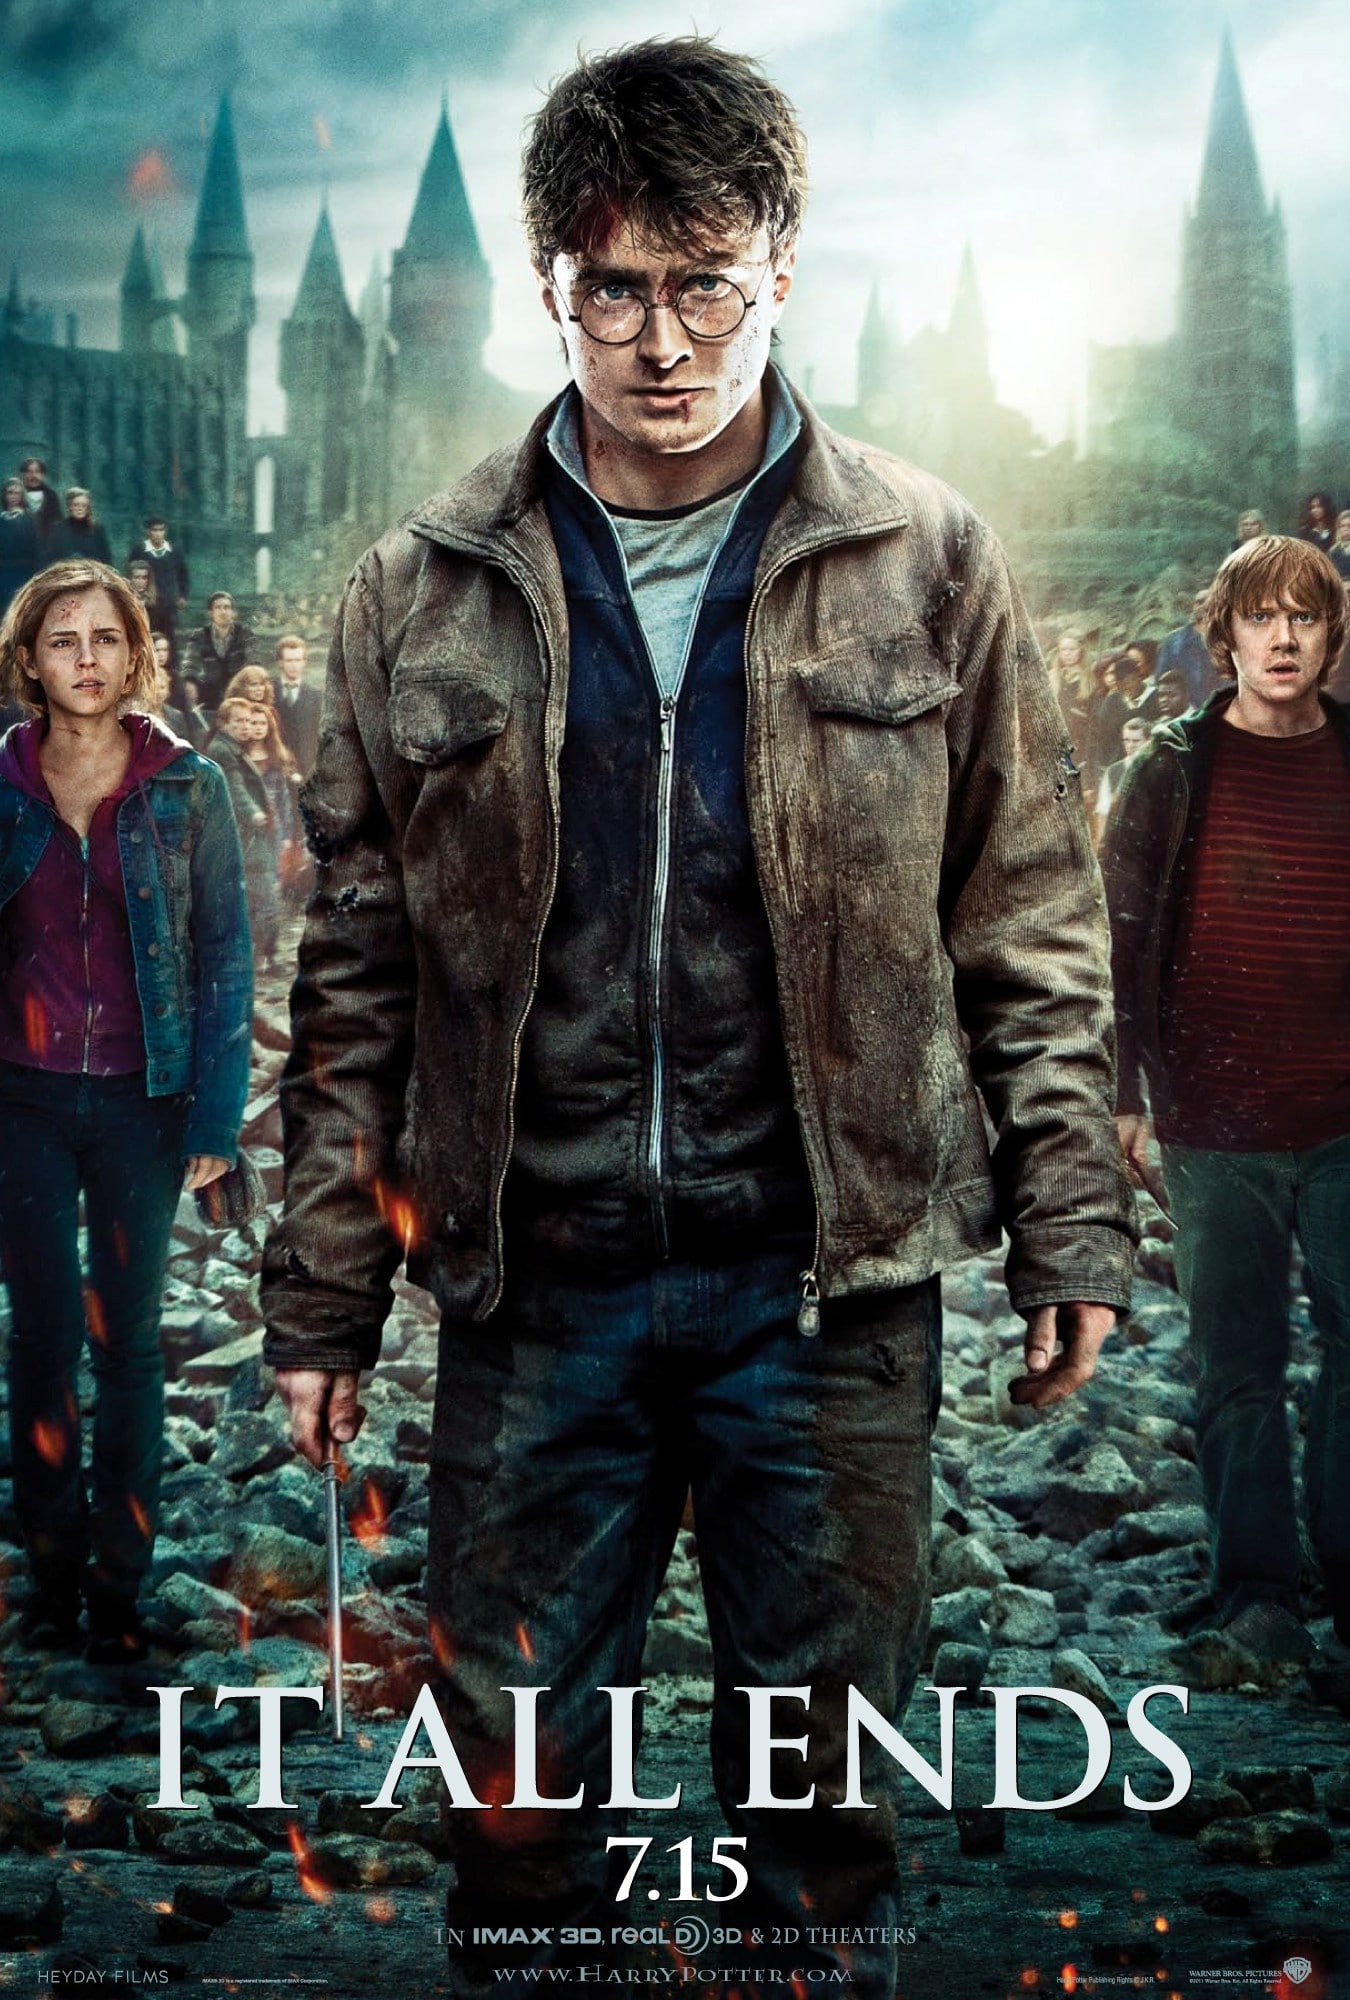 Harry Potter and the Deathly Hallows: Part 2 (PG-13) - Movie Deputy